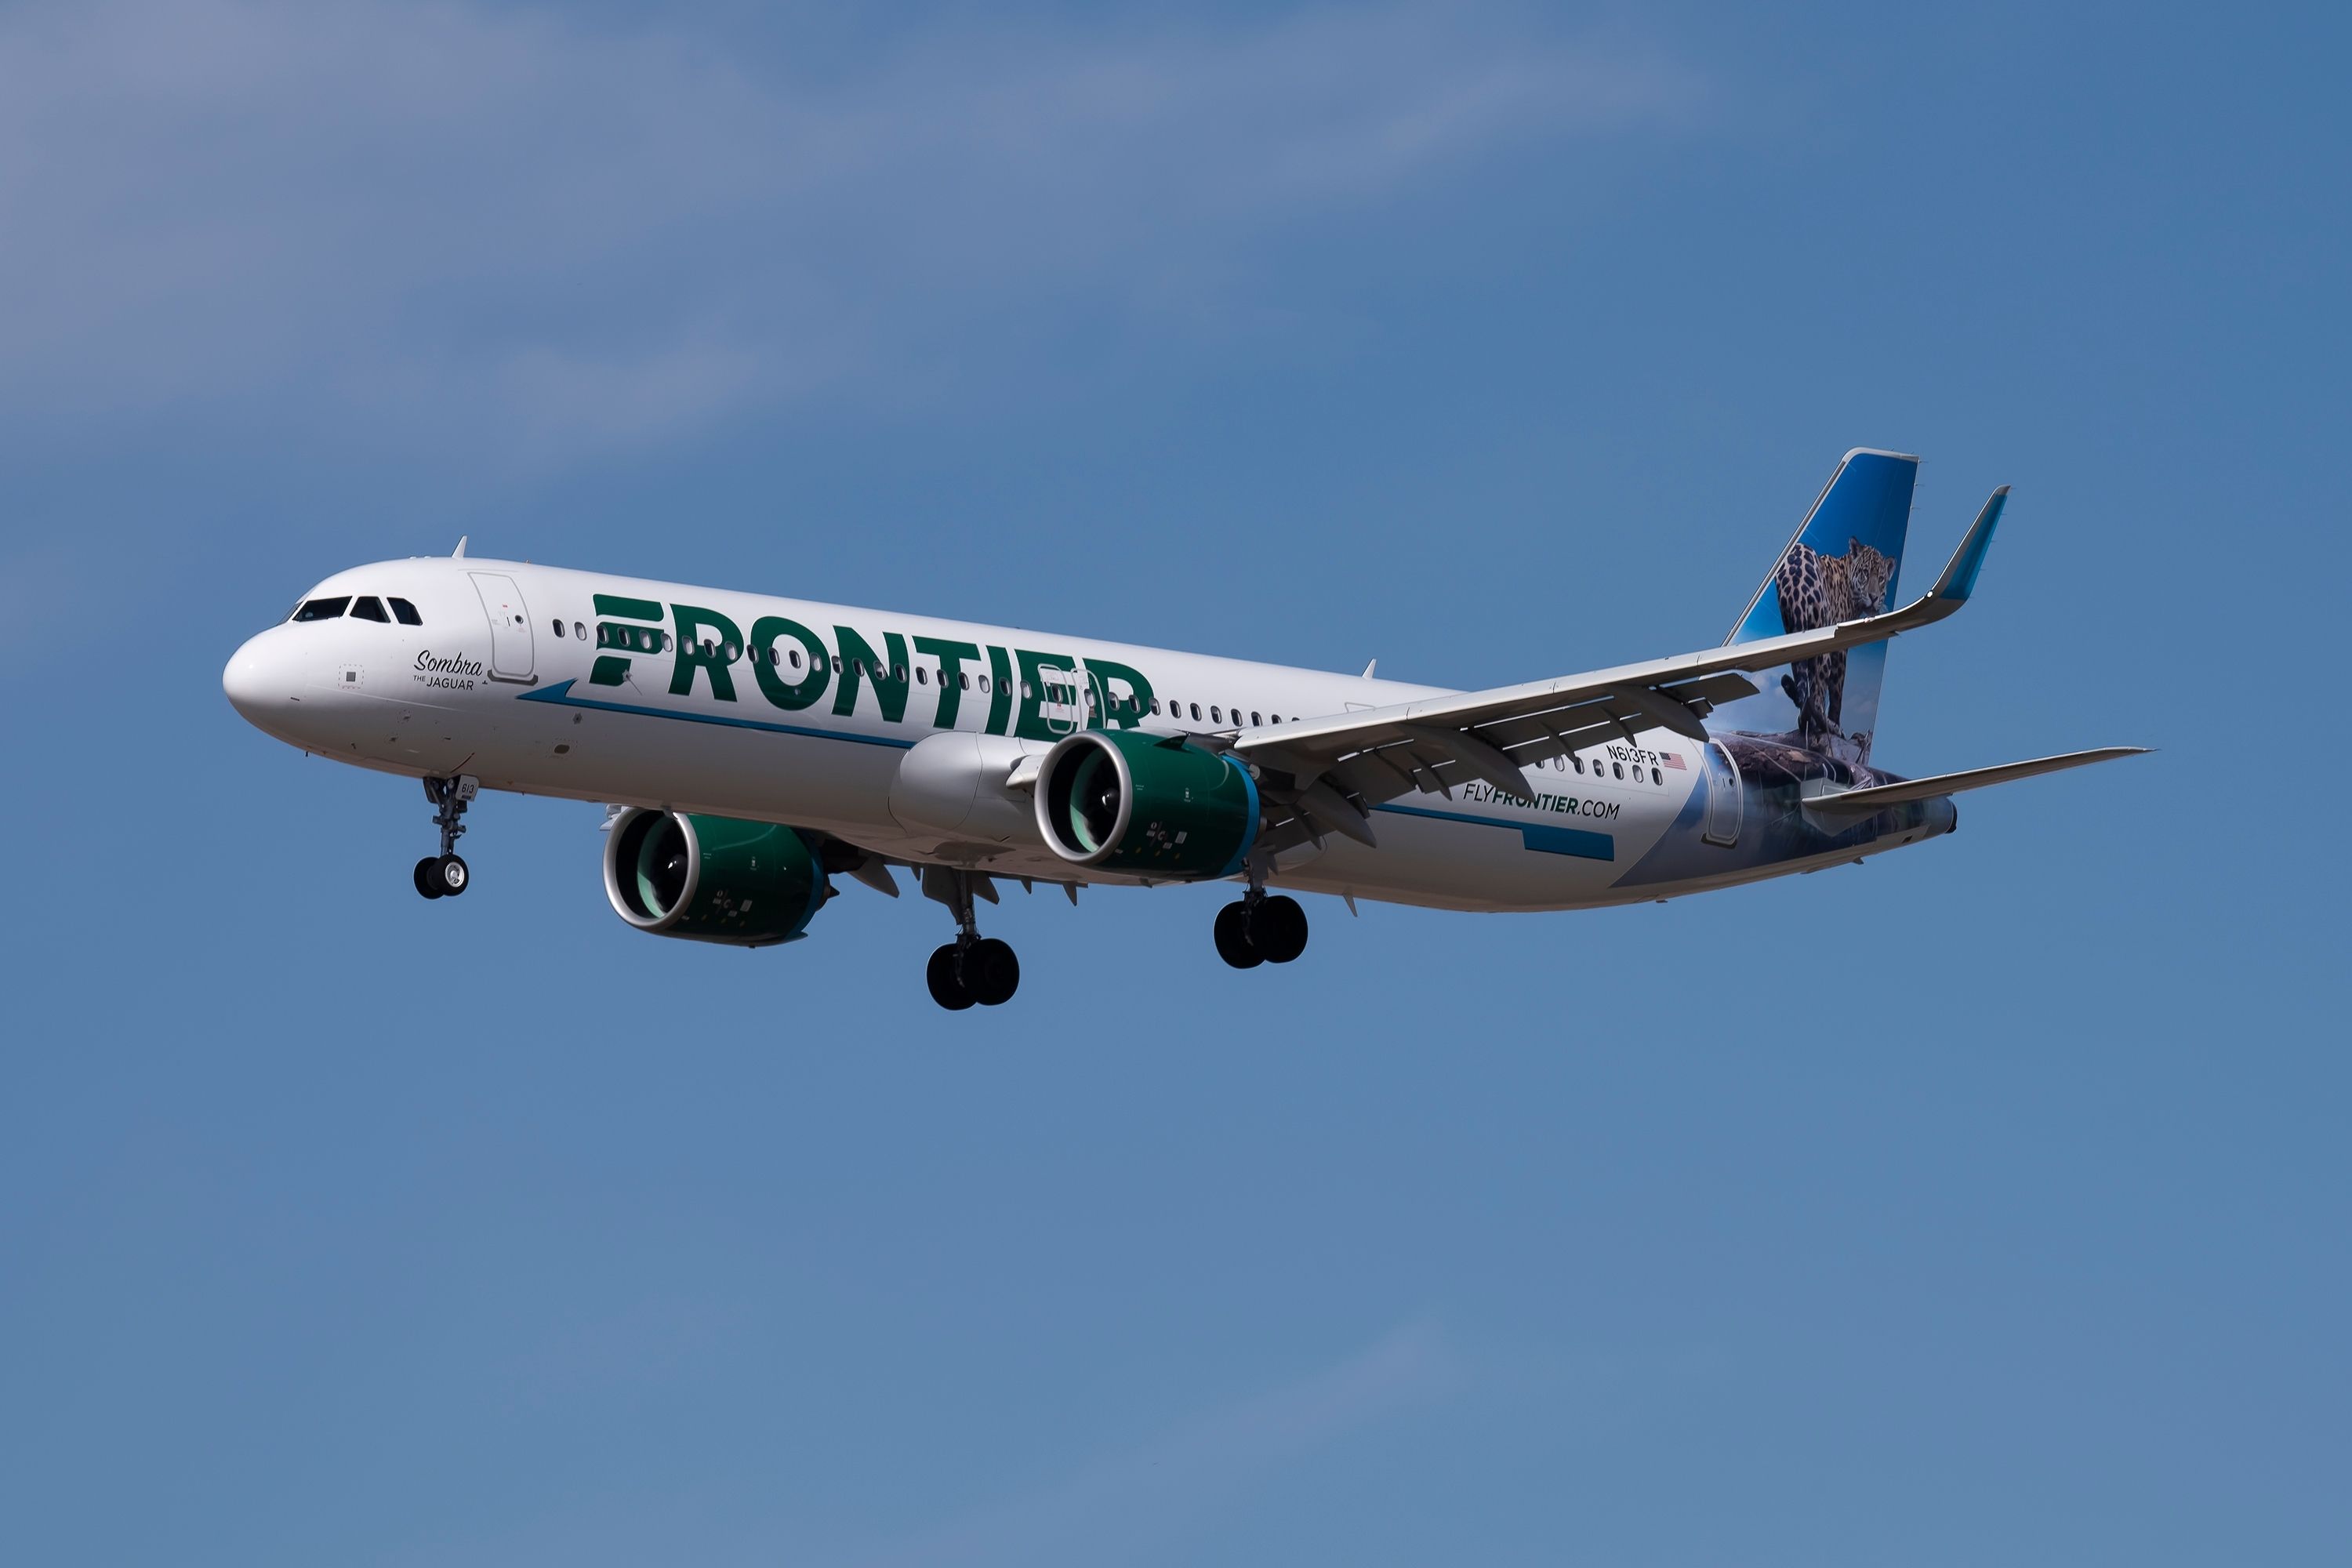 A Frontier Airlines Airbus A321neo flying in the sky.